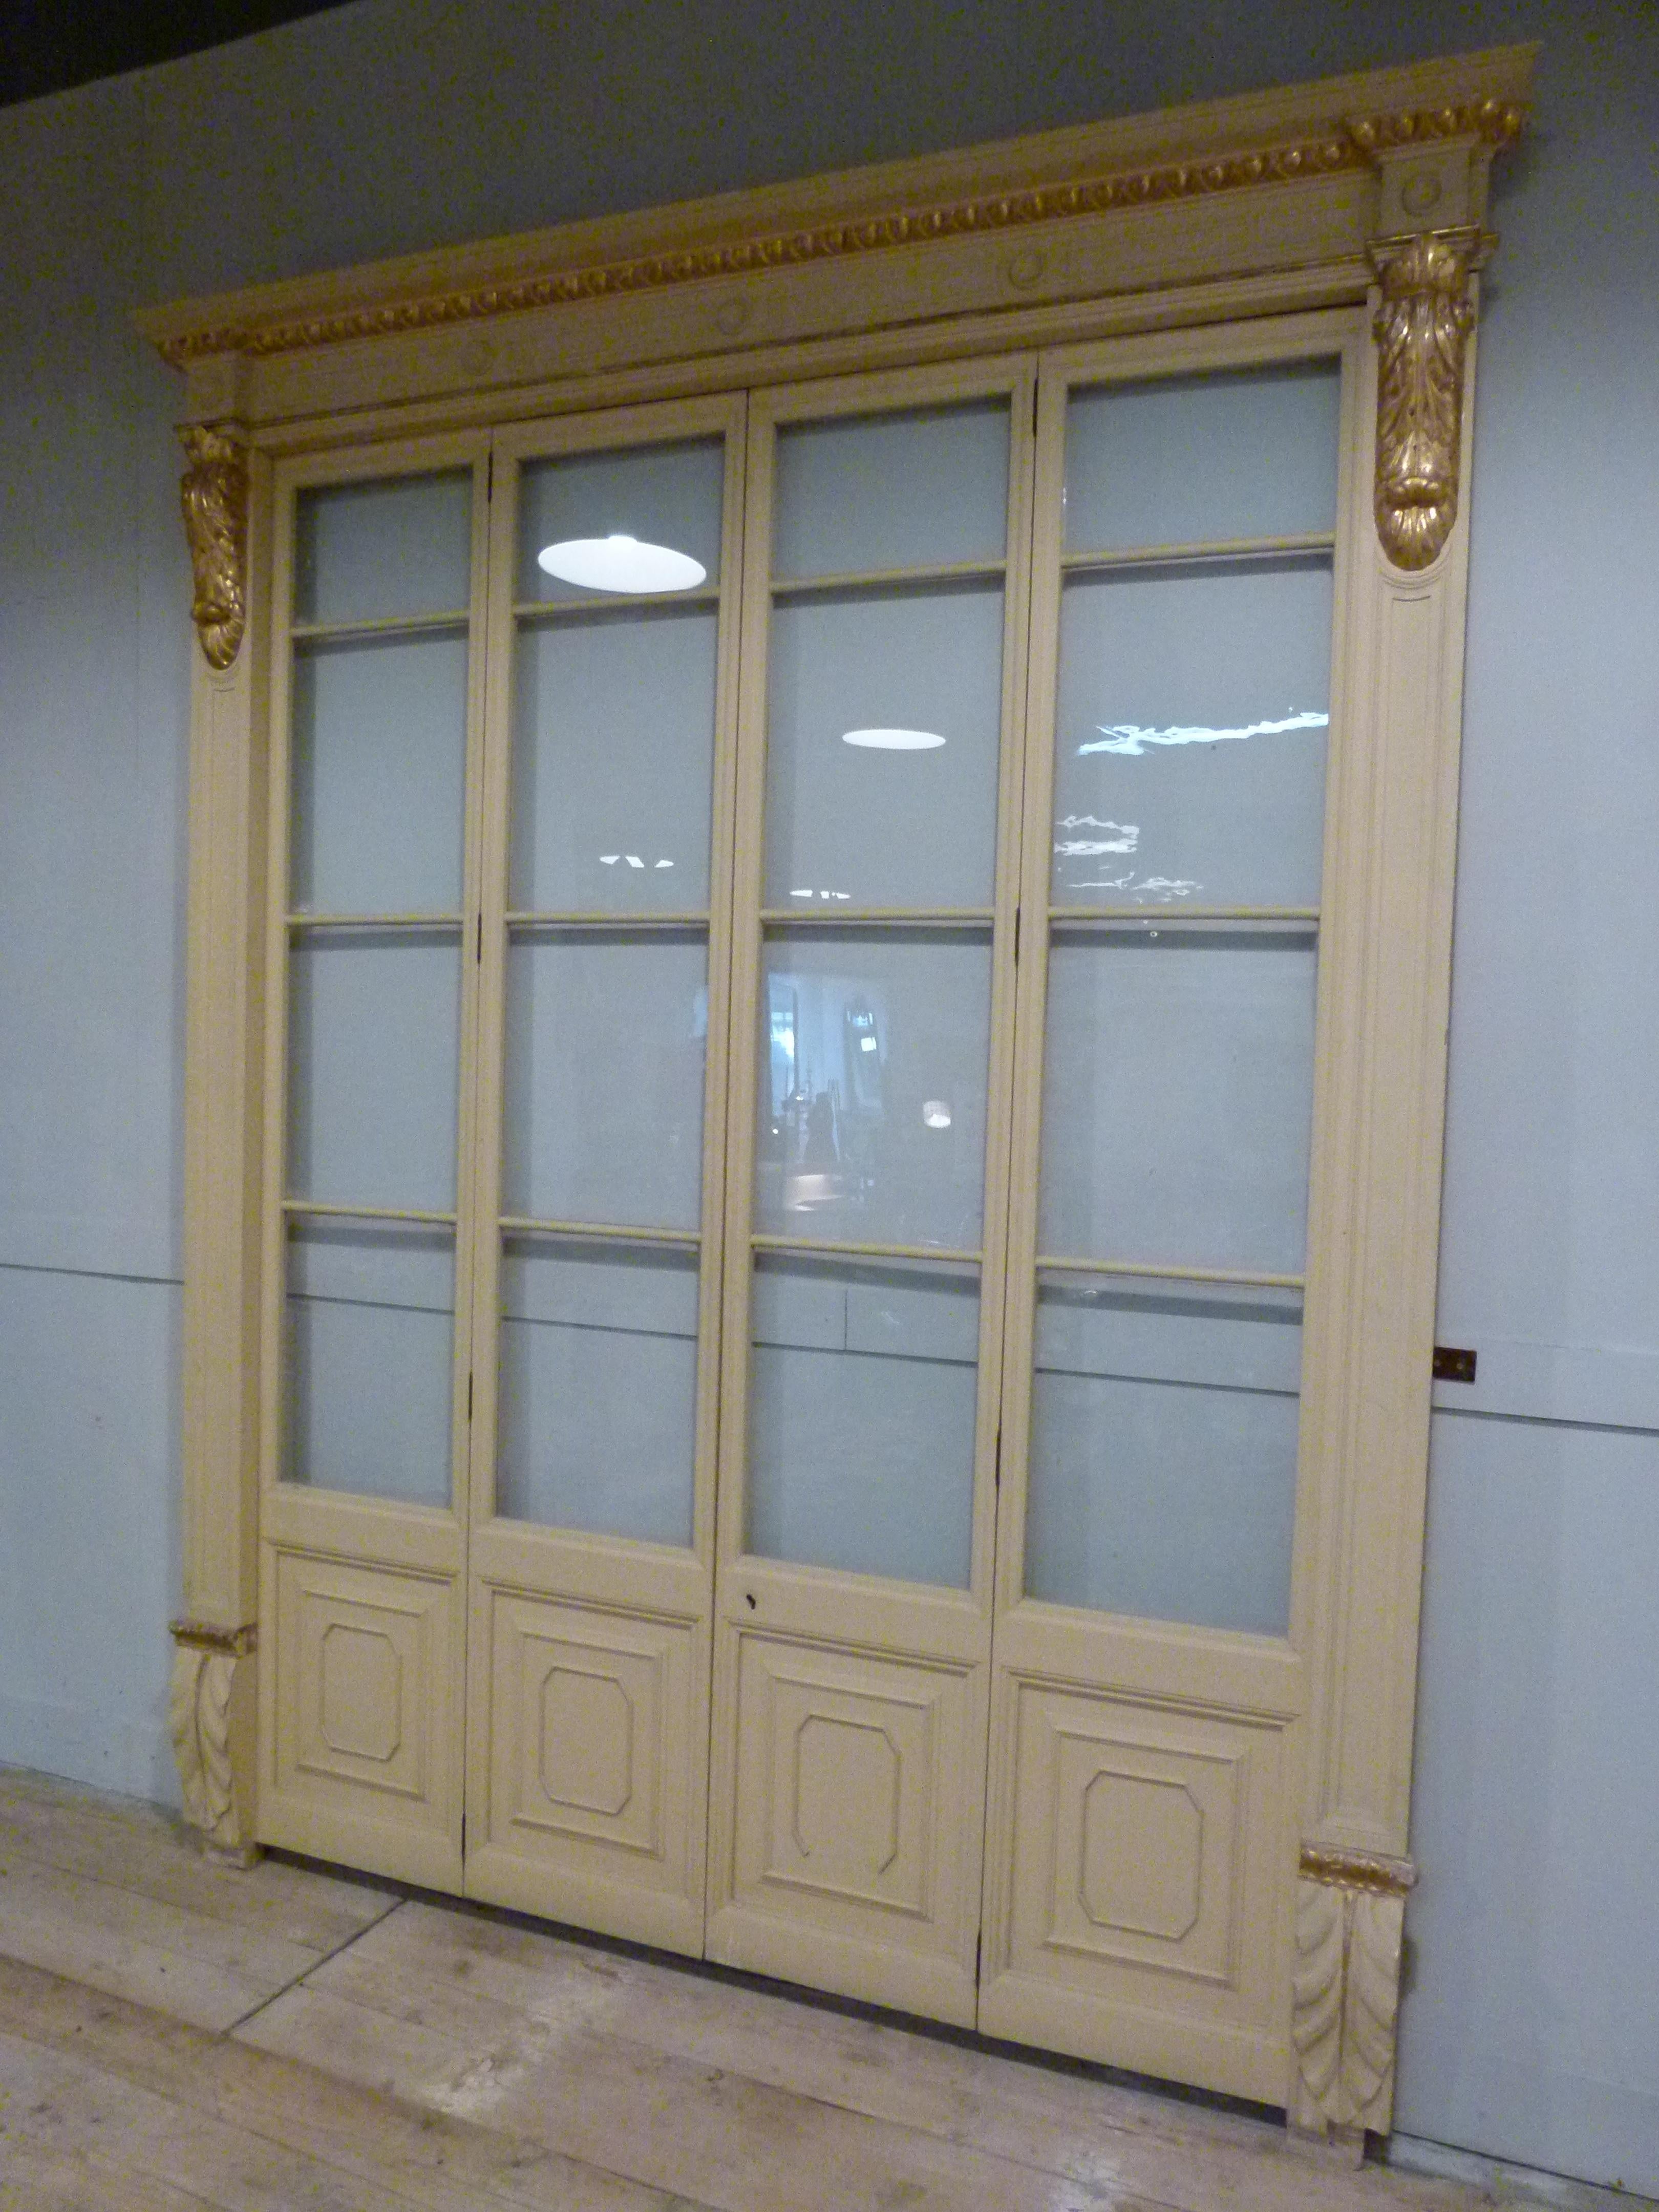 Typical glass double  door that was  located in an 